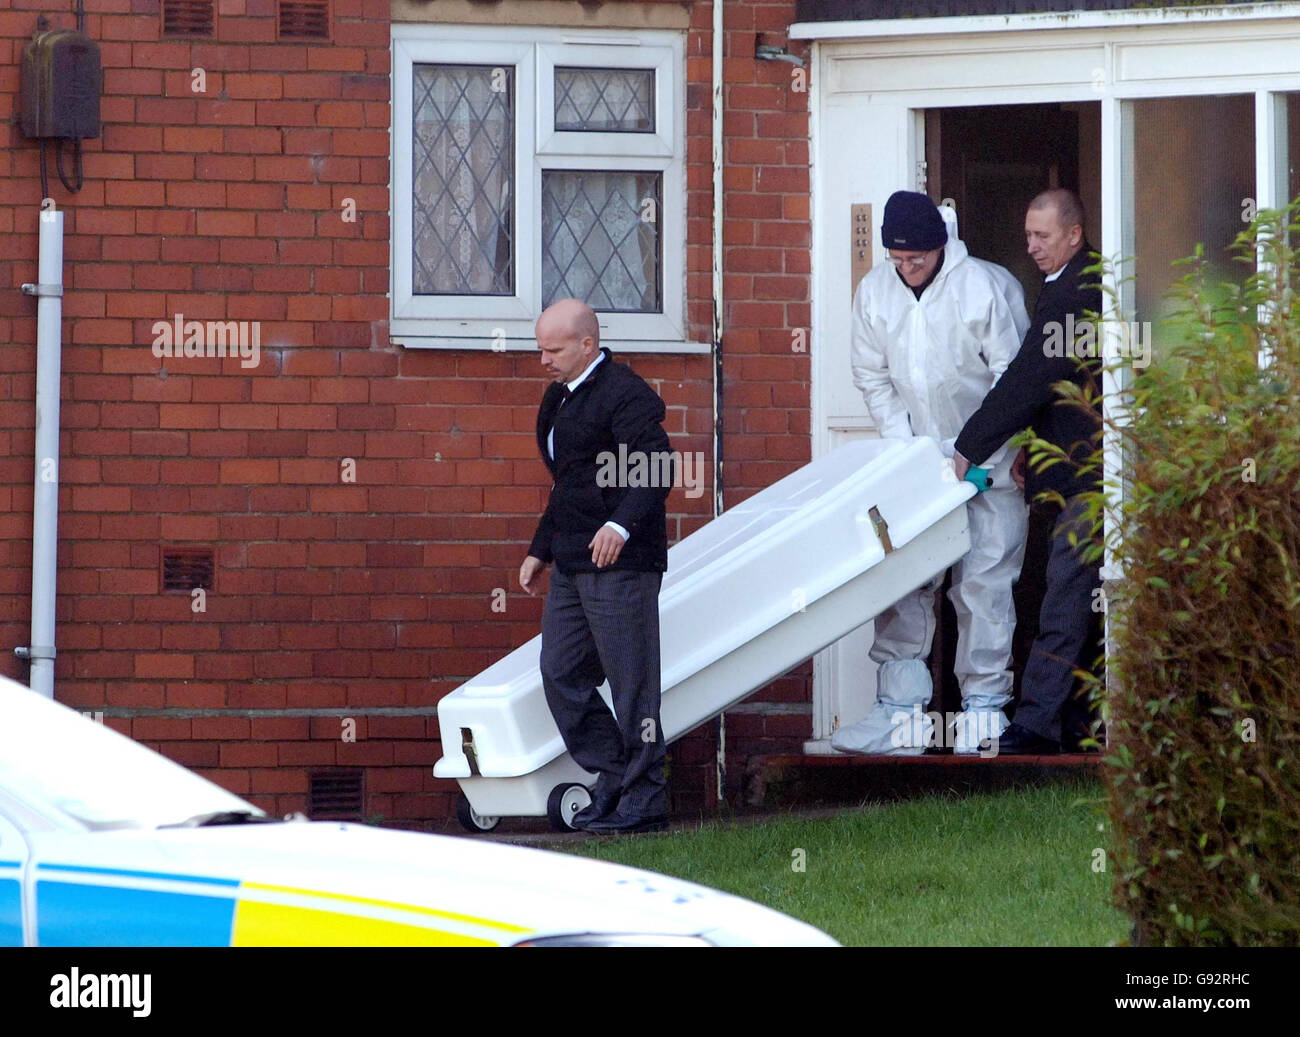 A coffin is wheeled from a house in Bondfield Way in the Meir area of Stoke, Monday December 19, 2005, after a firearm was discharged, killing a man at the scene. Officers were called to the incident at an address on Bondfield Way in Meir, Stoke-on-Trent, at around 1am, Staffordshire police said. See PA Story POLICE Shooting. PRESS ASSOCIATION Photo. Photo credit should read: David Jones/PA Stock Photo